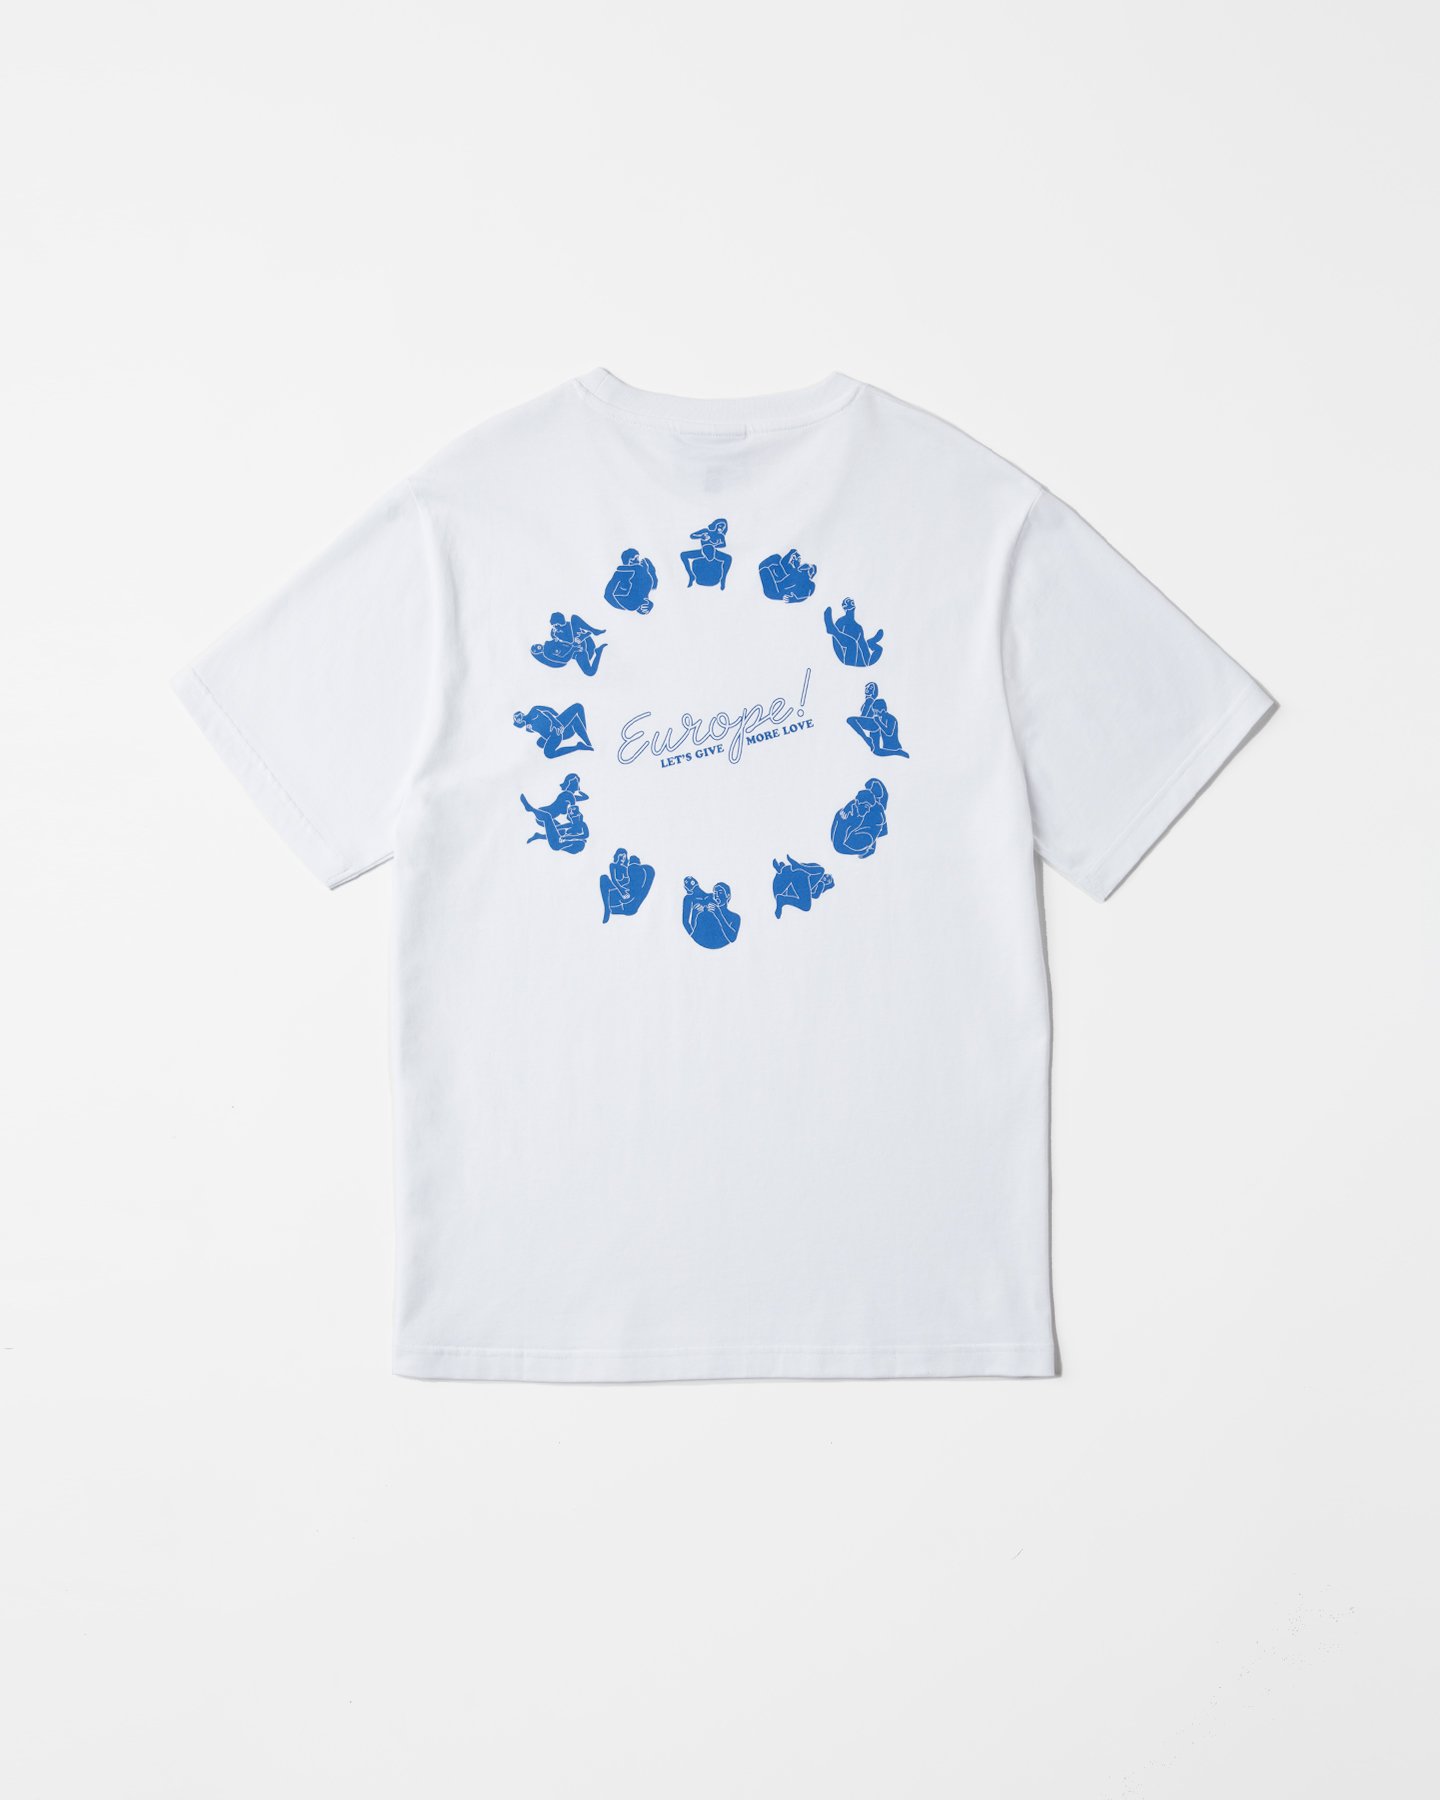 Carne Bollente - Let's Give More Love T-Shirt White - Clothing - White - Image 1